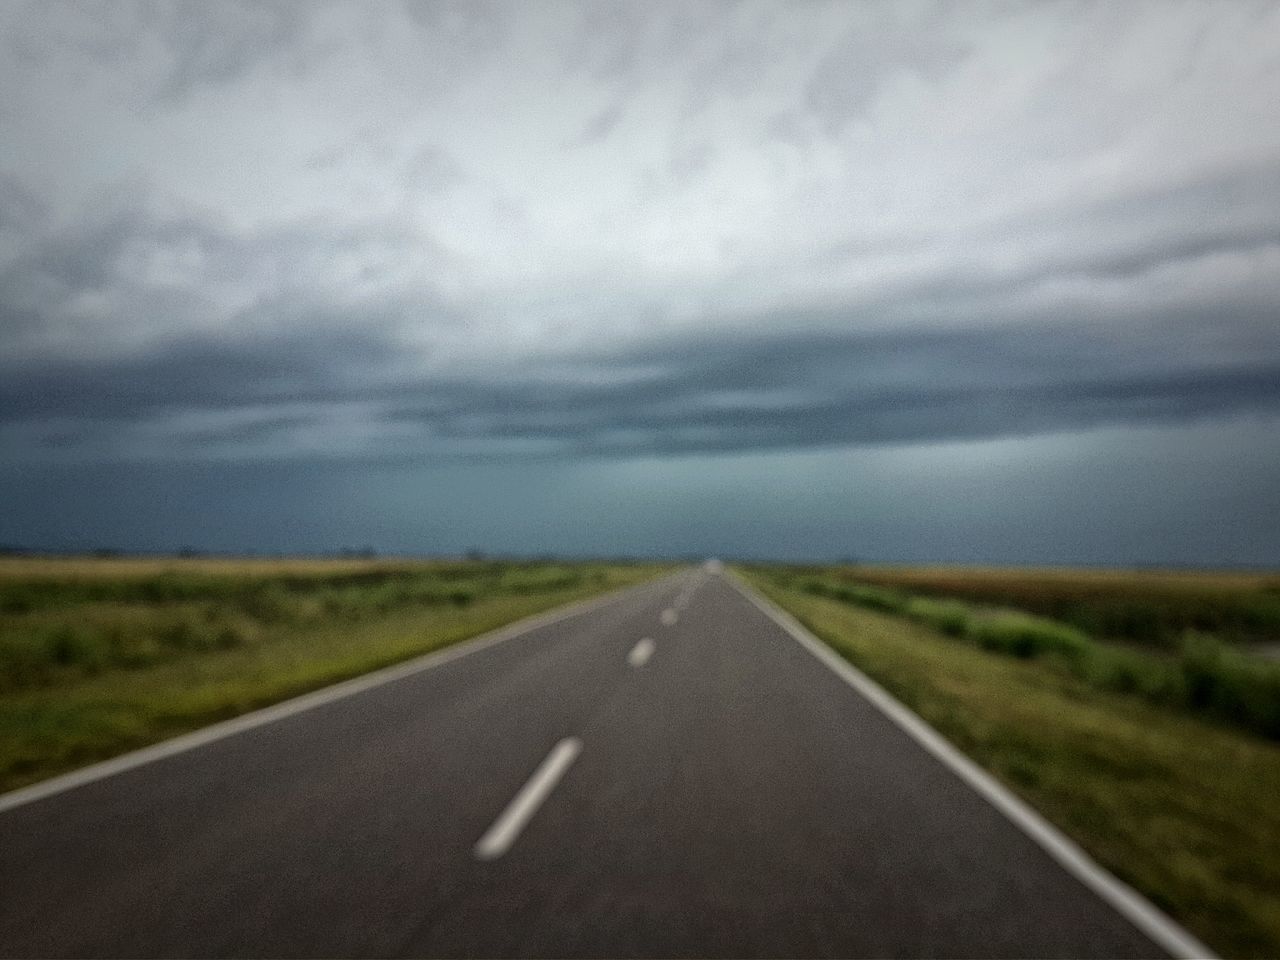 the way forward, road, transportation, diminishing perspective, road marking, sky, vanishing point, country road, cloud - sky, asphalt, landscape, empty road, cloudy, tranquility, empty, tranquil scene, field, nature, cloud, grass